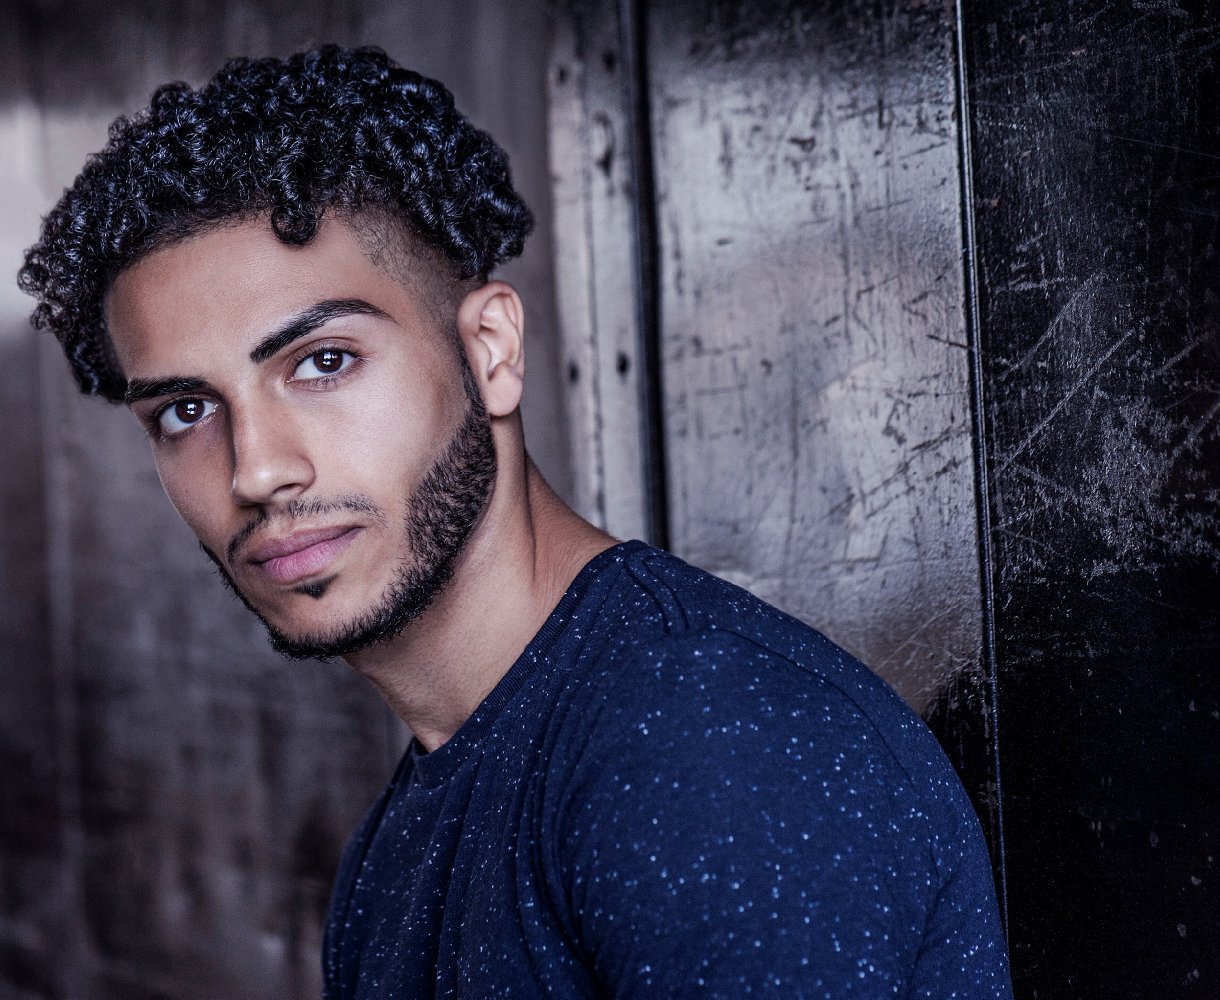 Mena Massoud will play Aladdin in the live-action adaptation.